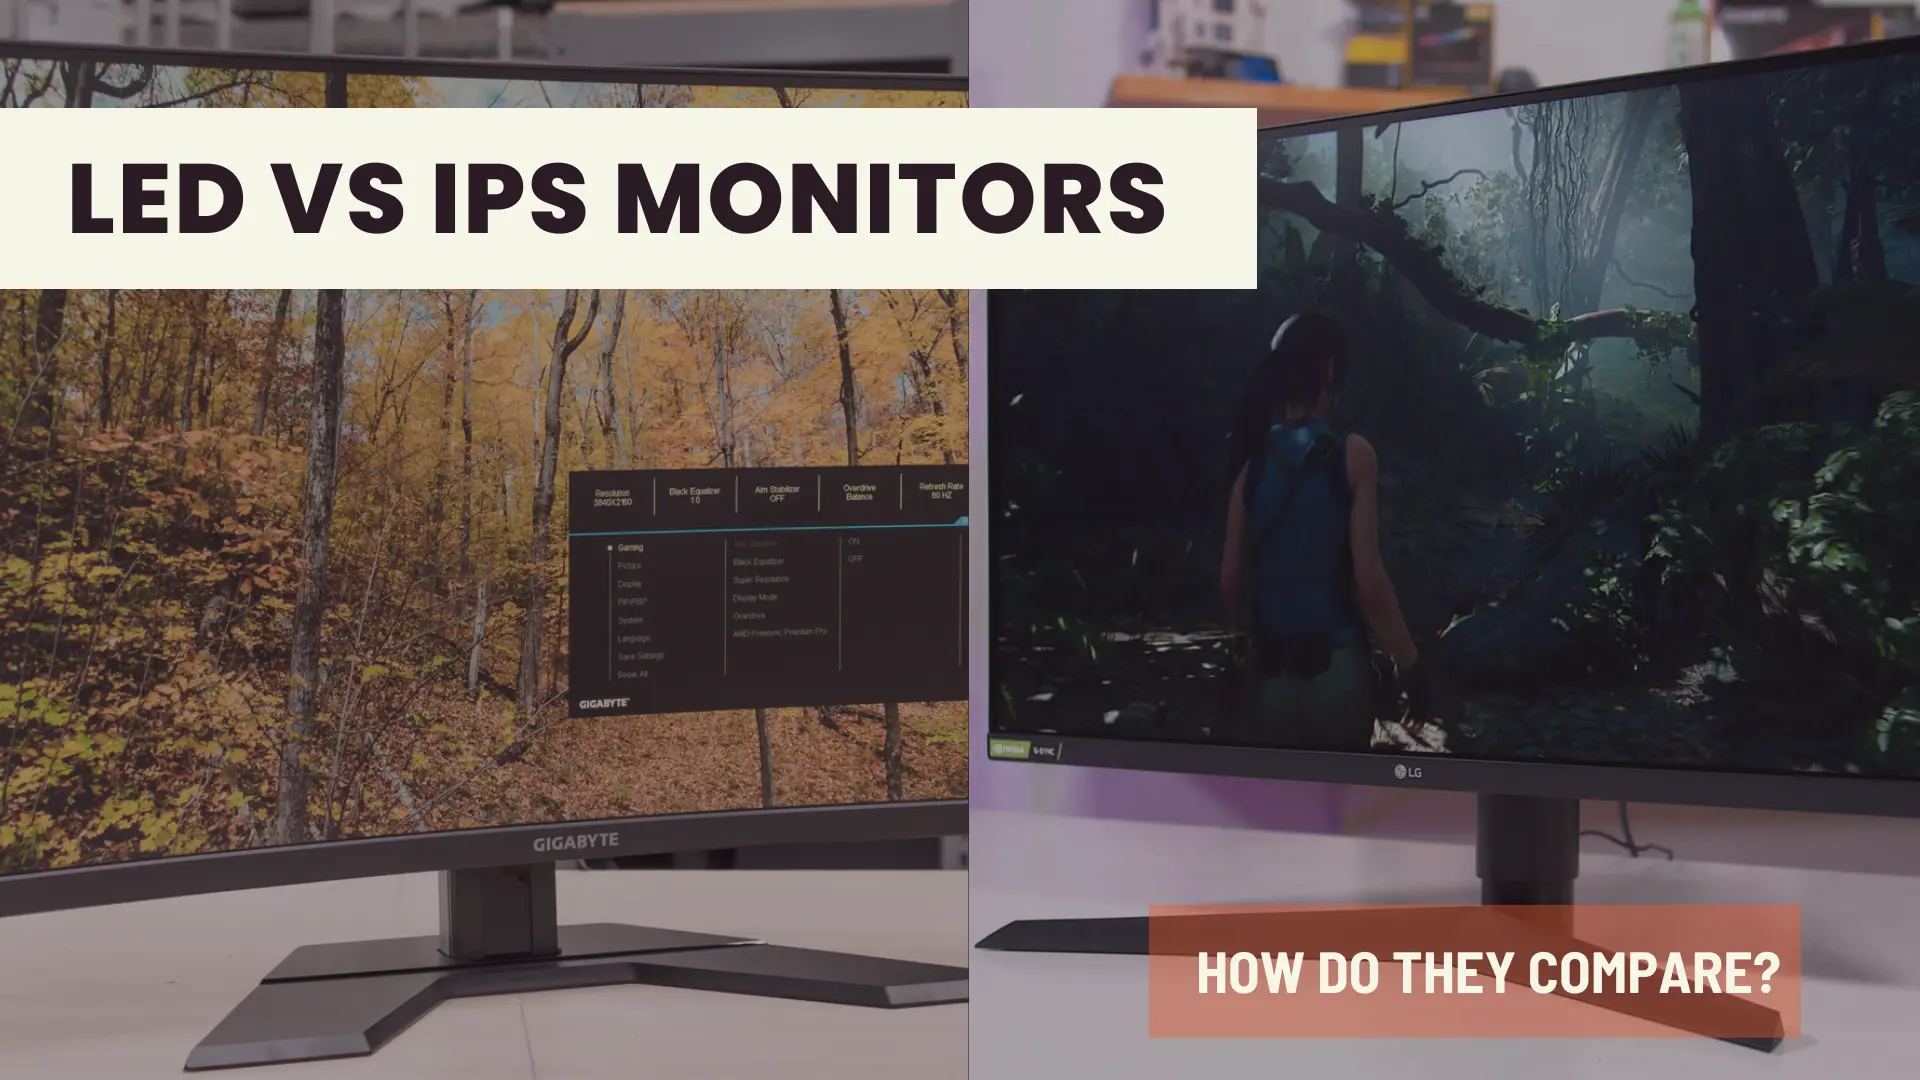 LED vs IPS Monitors: How Do They Compare?